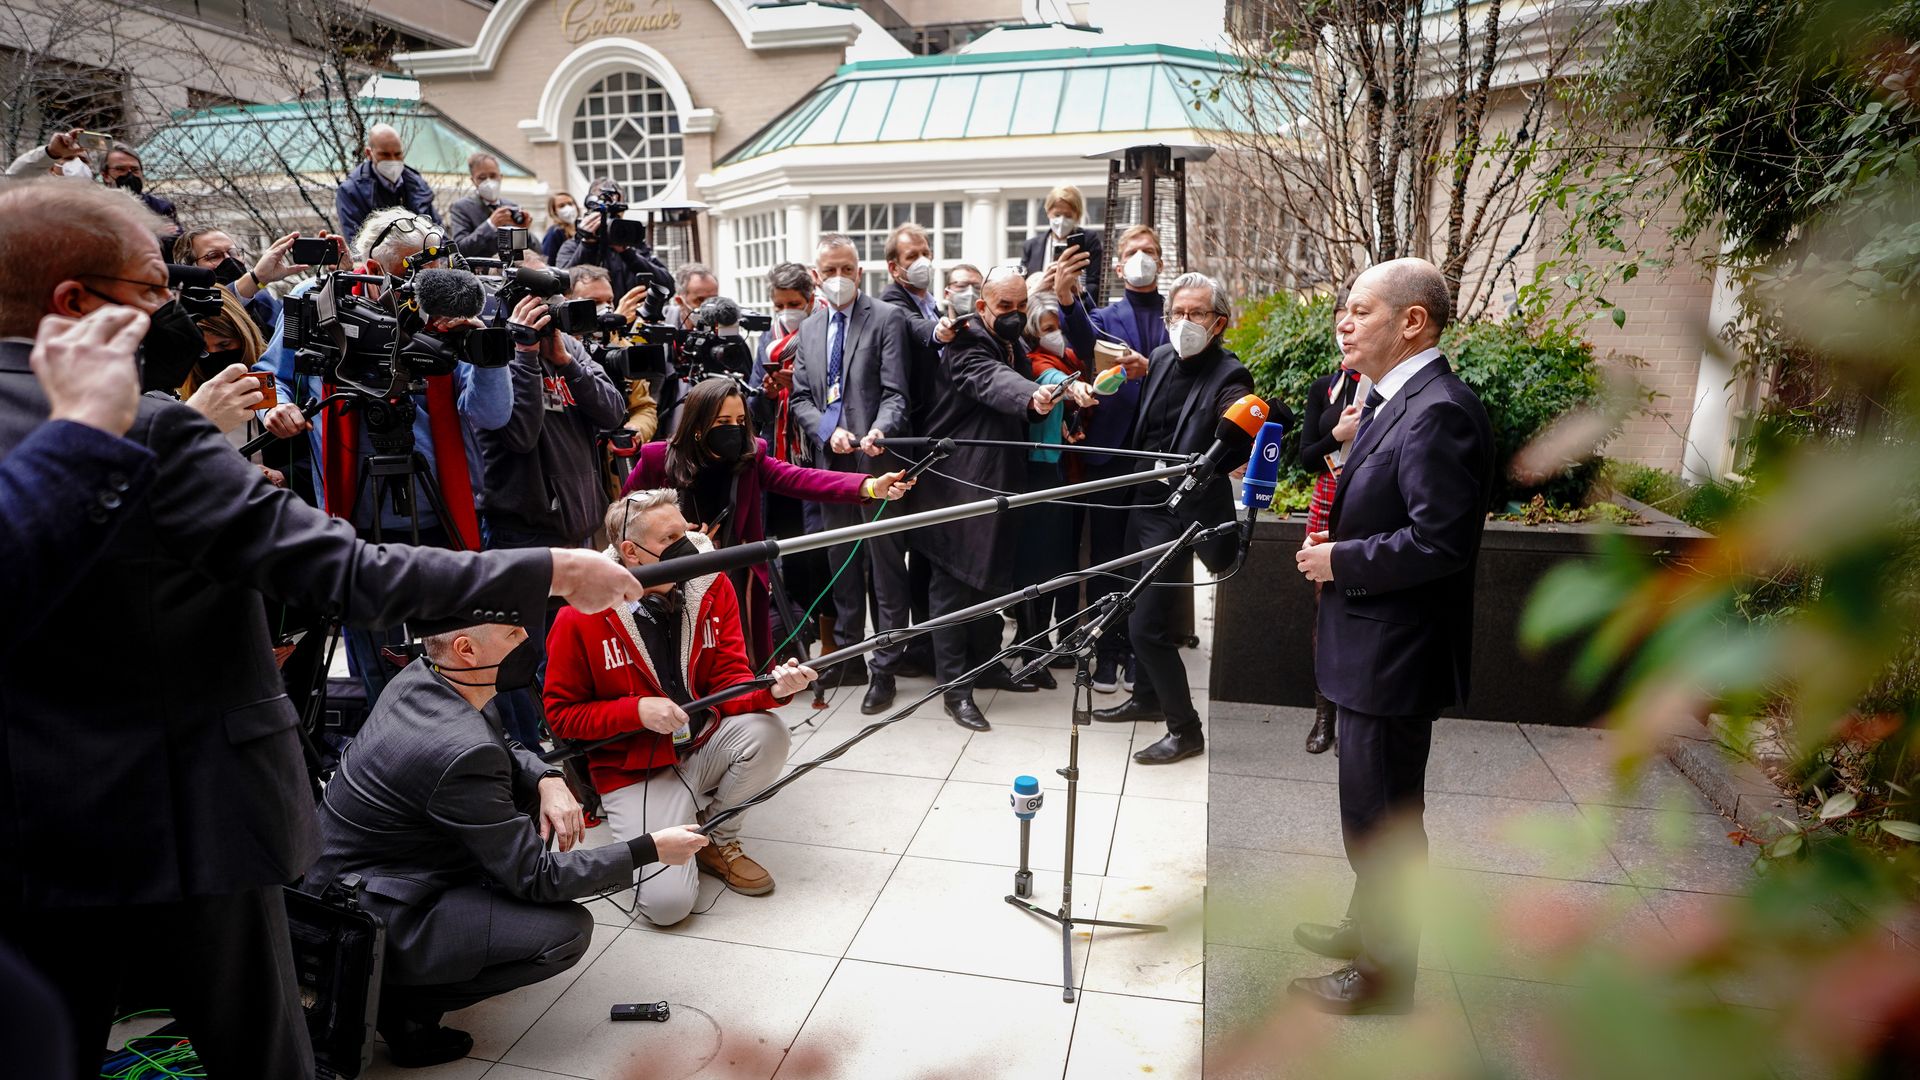 German Chancellor Olaf Scholz is seen addressing his traveling media before a meeting in Washington with President Biden.